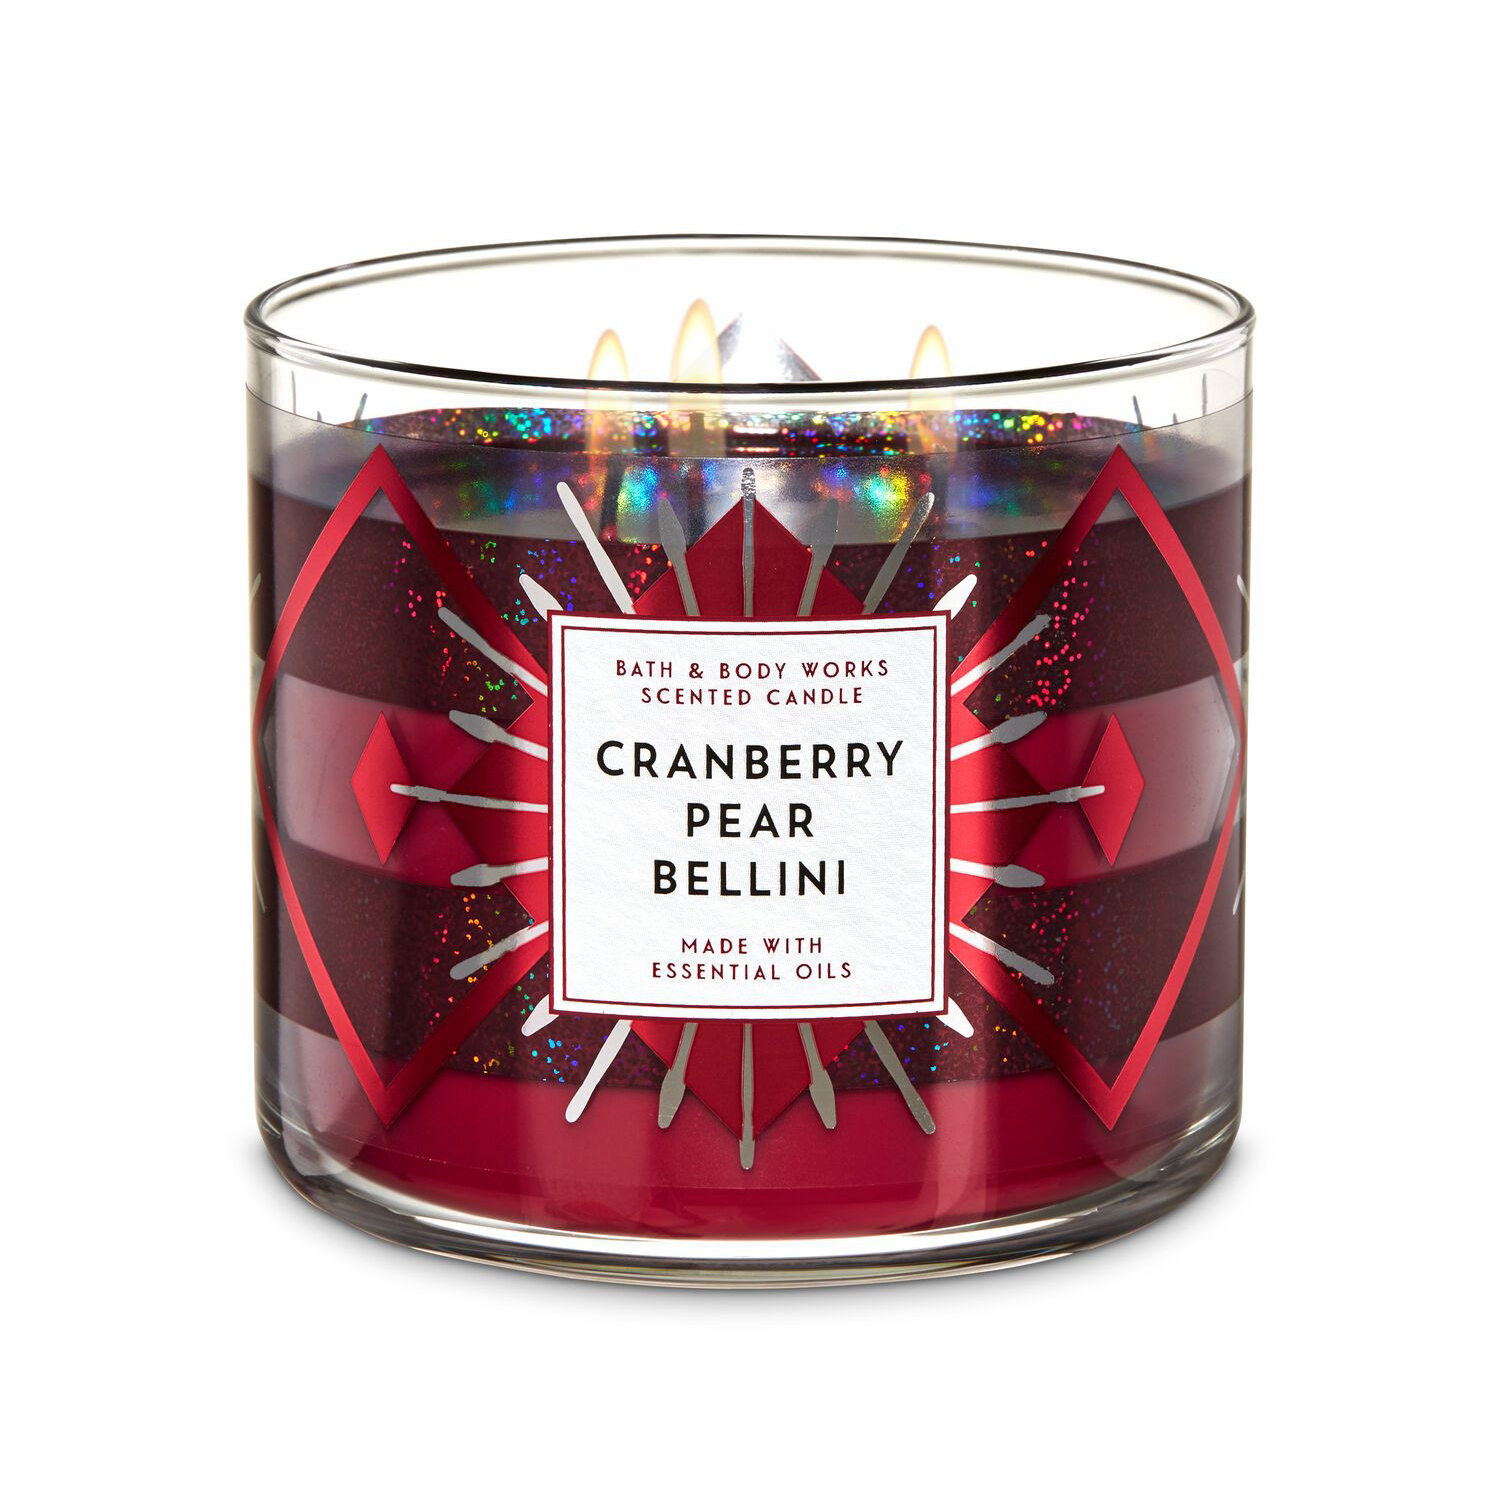 CRANBERRY PEAR BELLINI BATH & BODY WORKS SCENTED CANDLE 3 WICK LARGE 14.5 OZ 